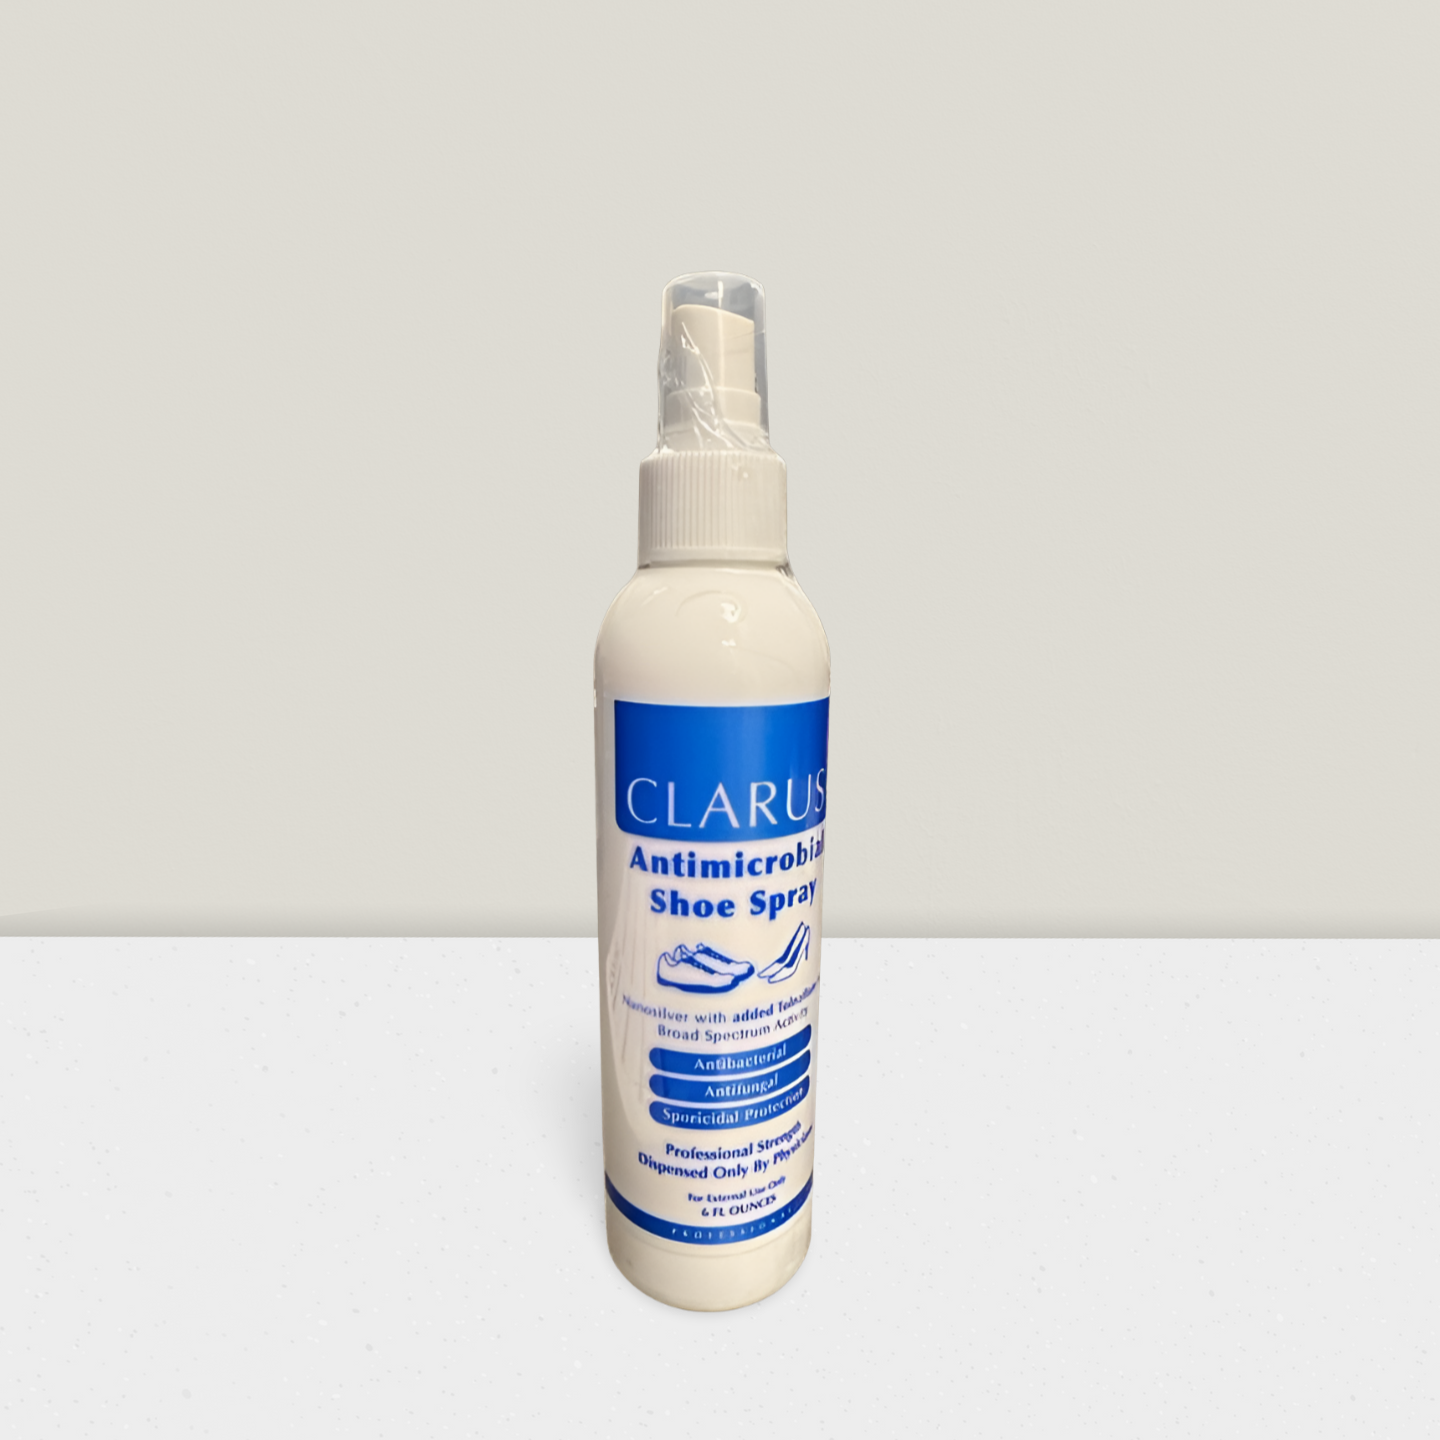 CLARUS Antimicrobial Shoe Shield